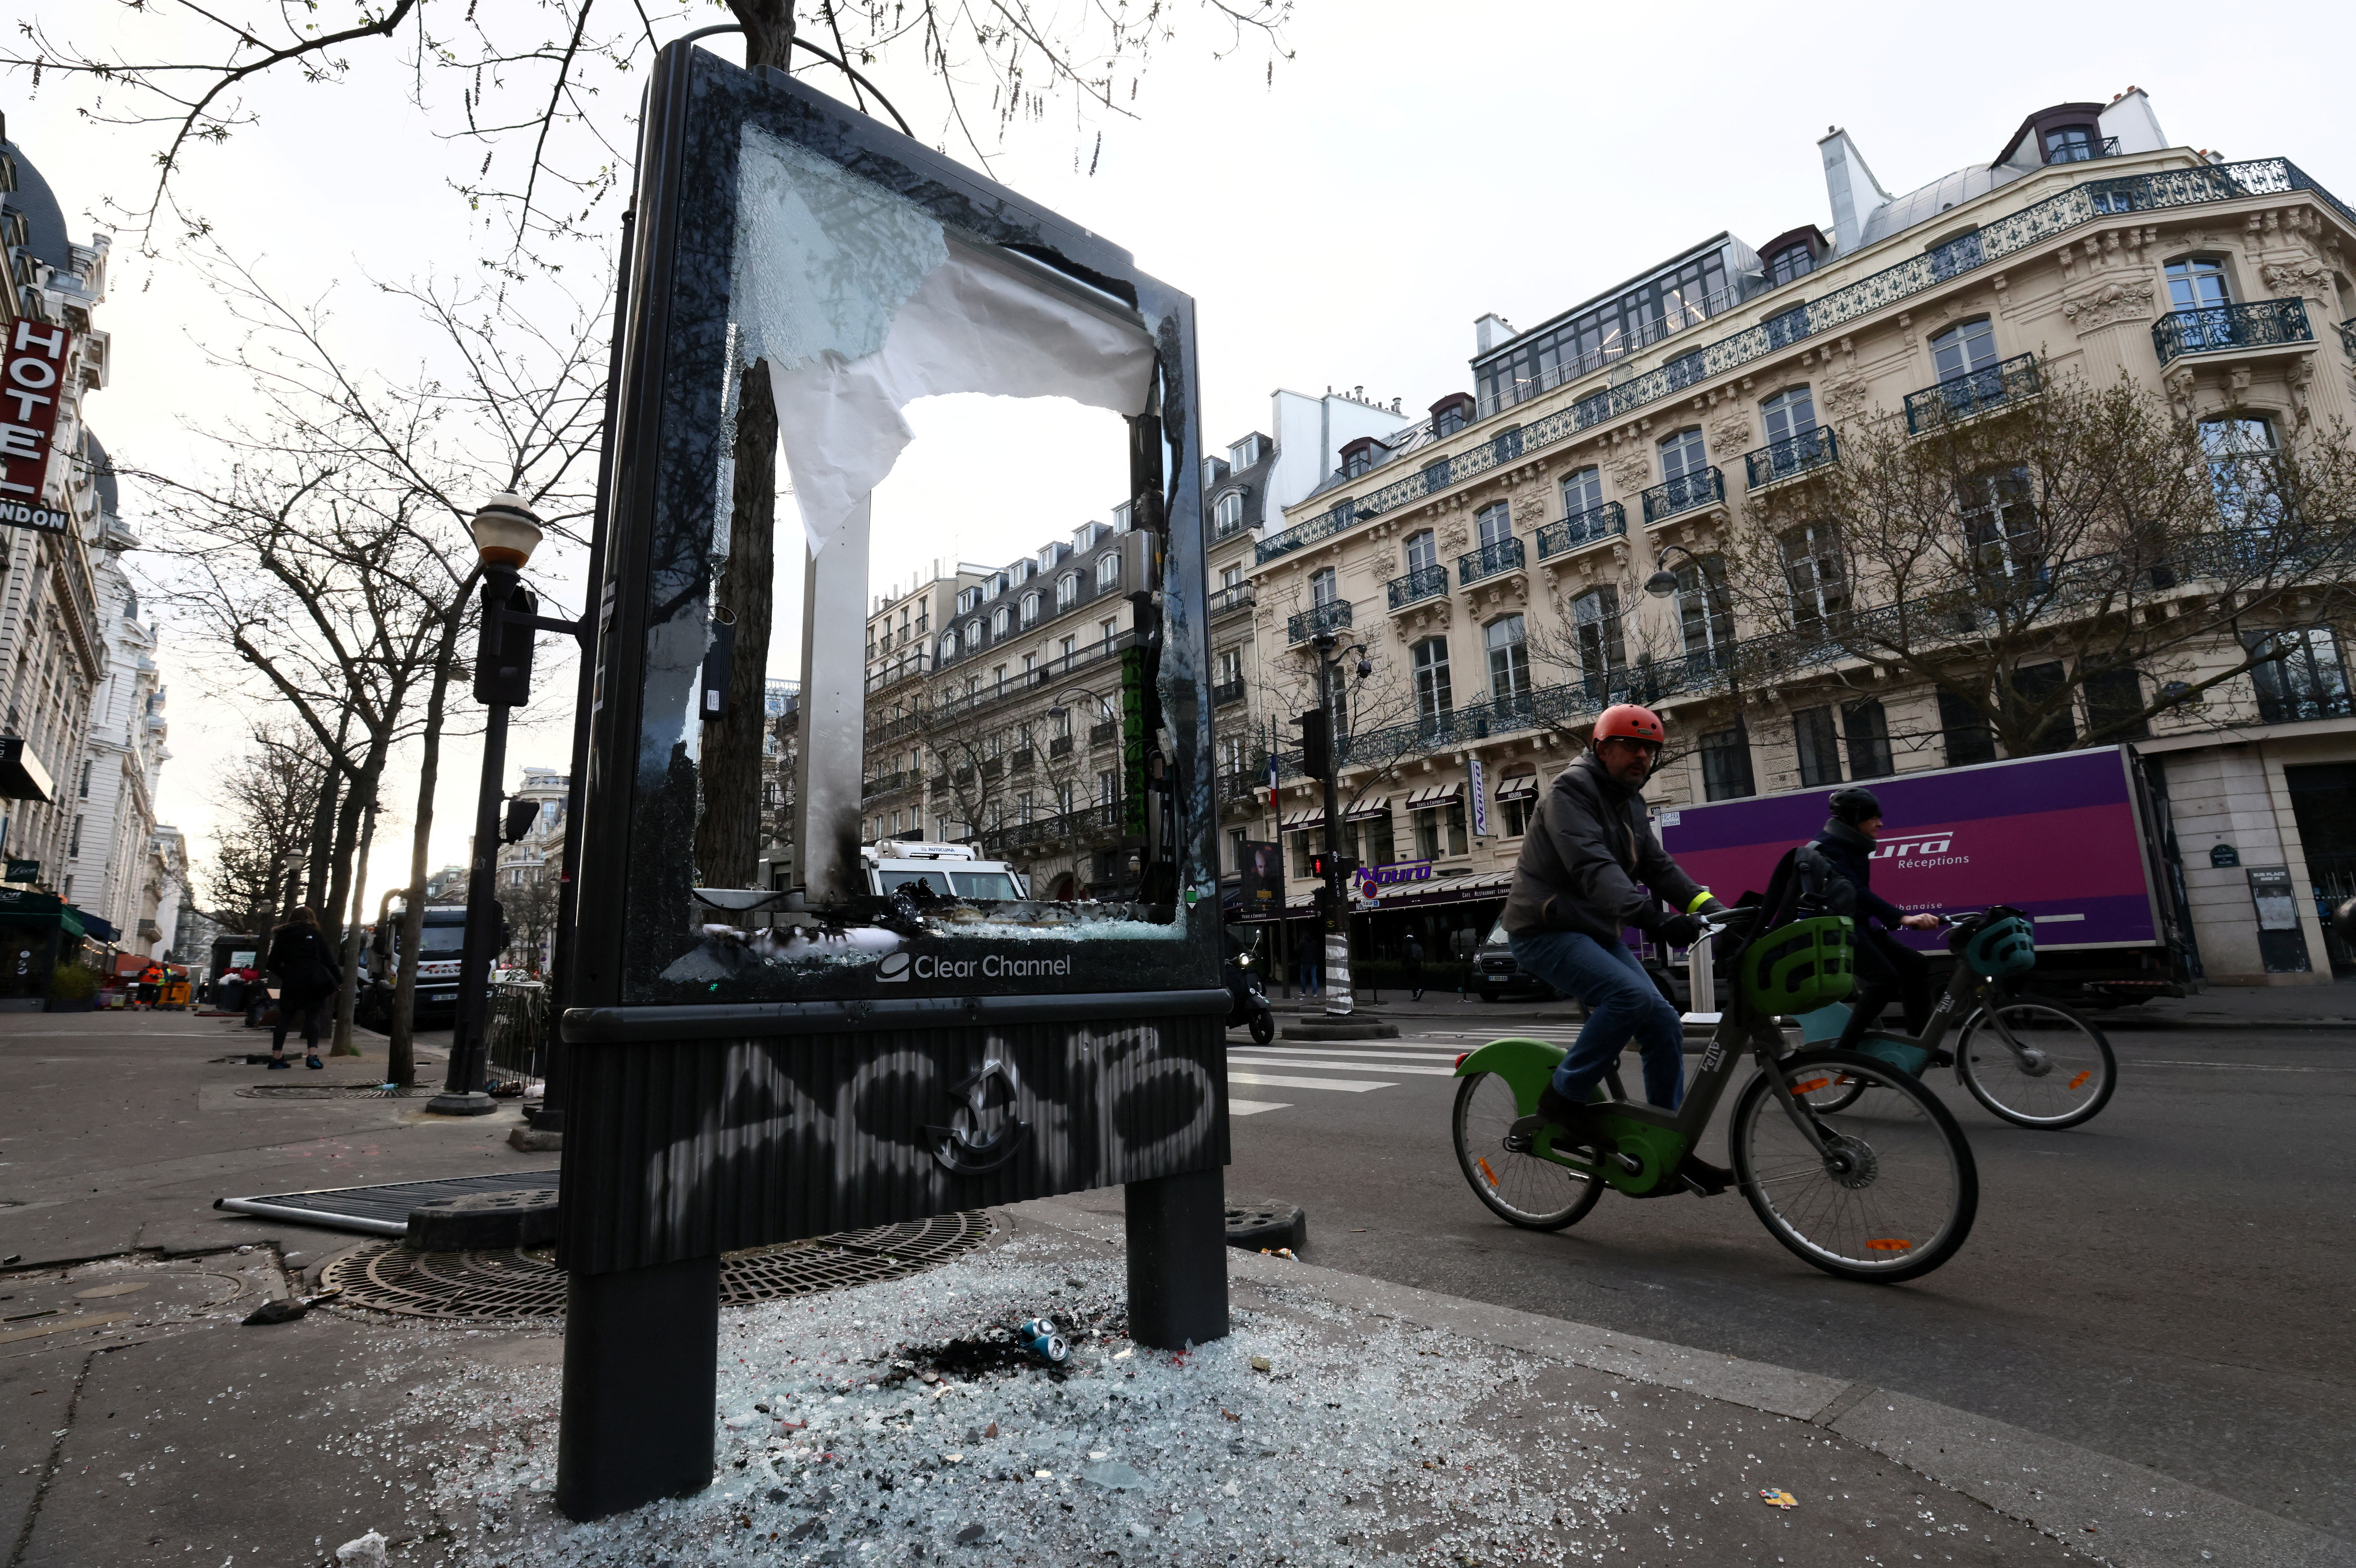 Damages in Paris streets following pension reform protests